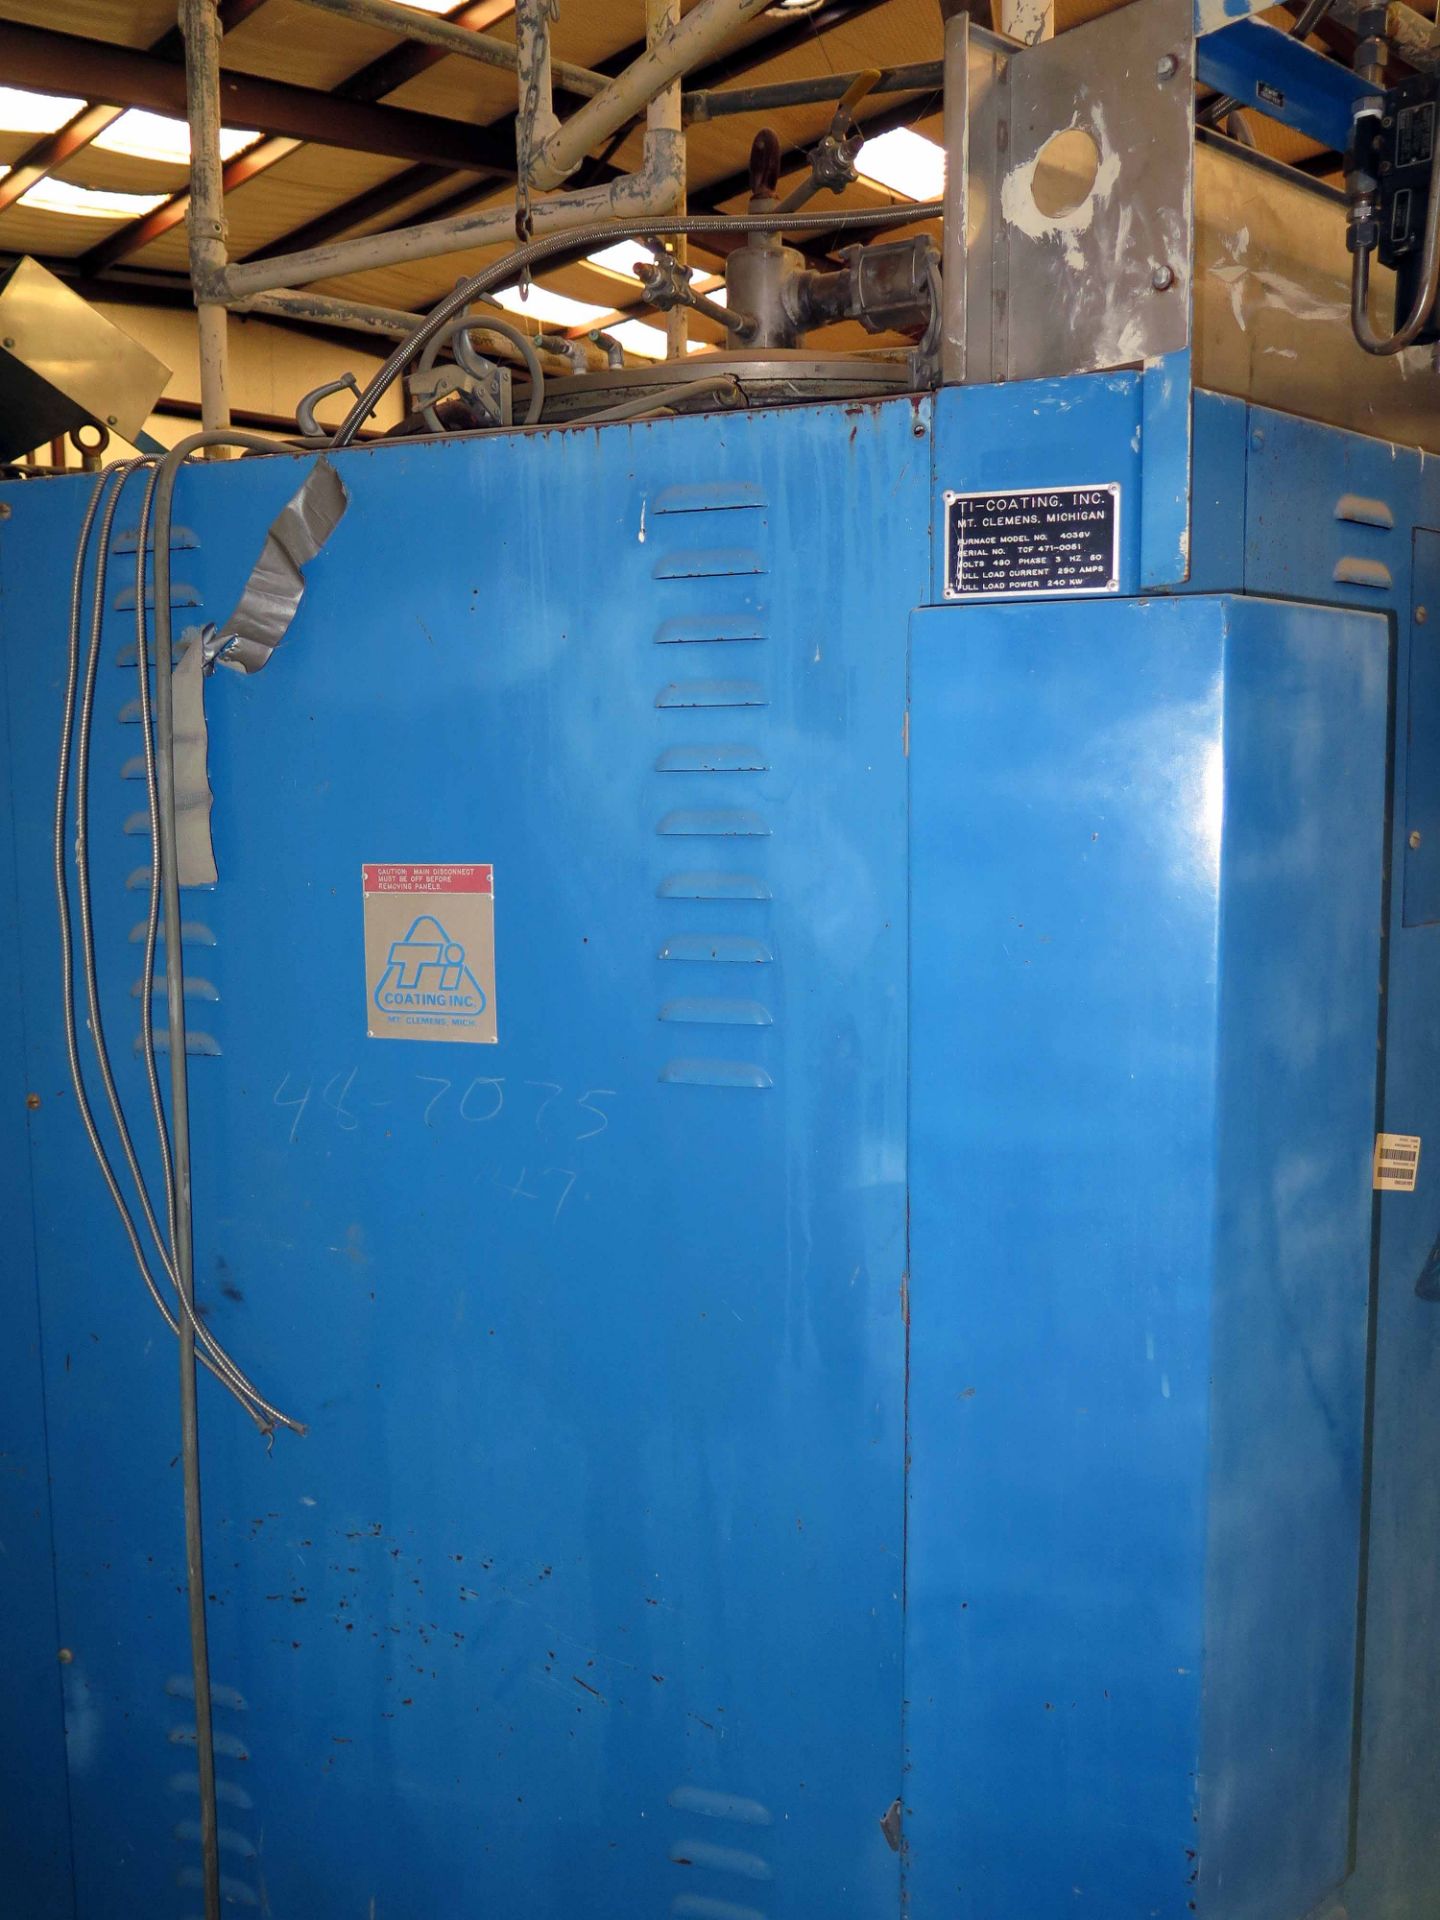 FLUORIDE ION CLEANING SYSTEM, TR COATING INC, including (2) 60 KVA & (1) 120 KVA pwr. supplies, - Image 3 of 26